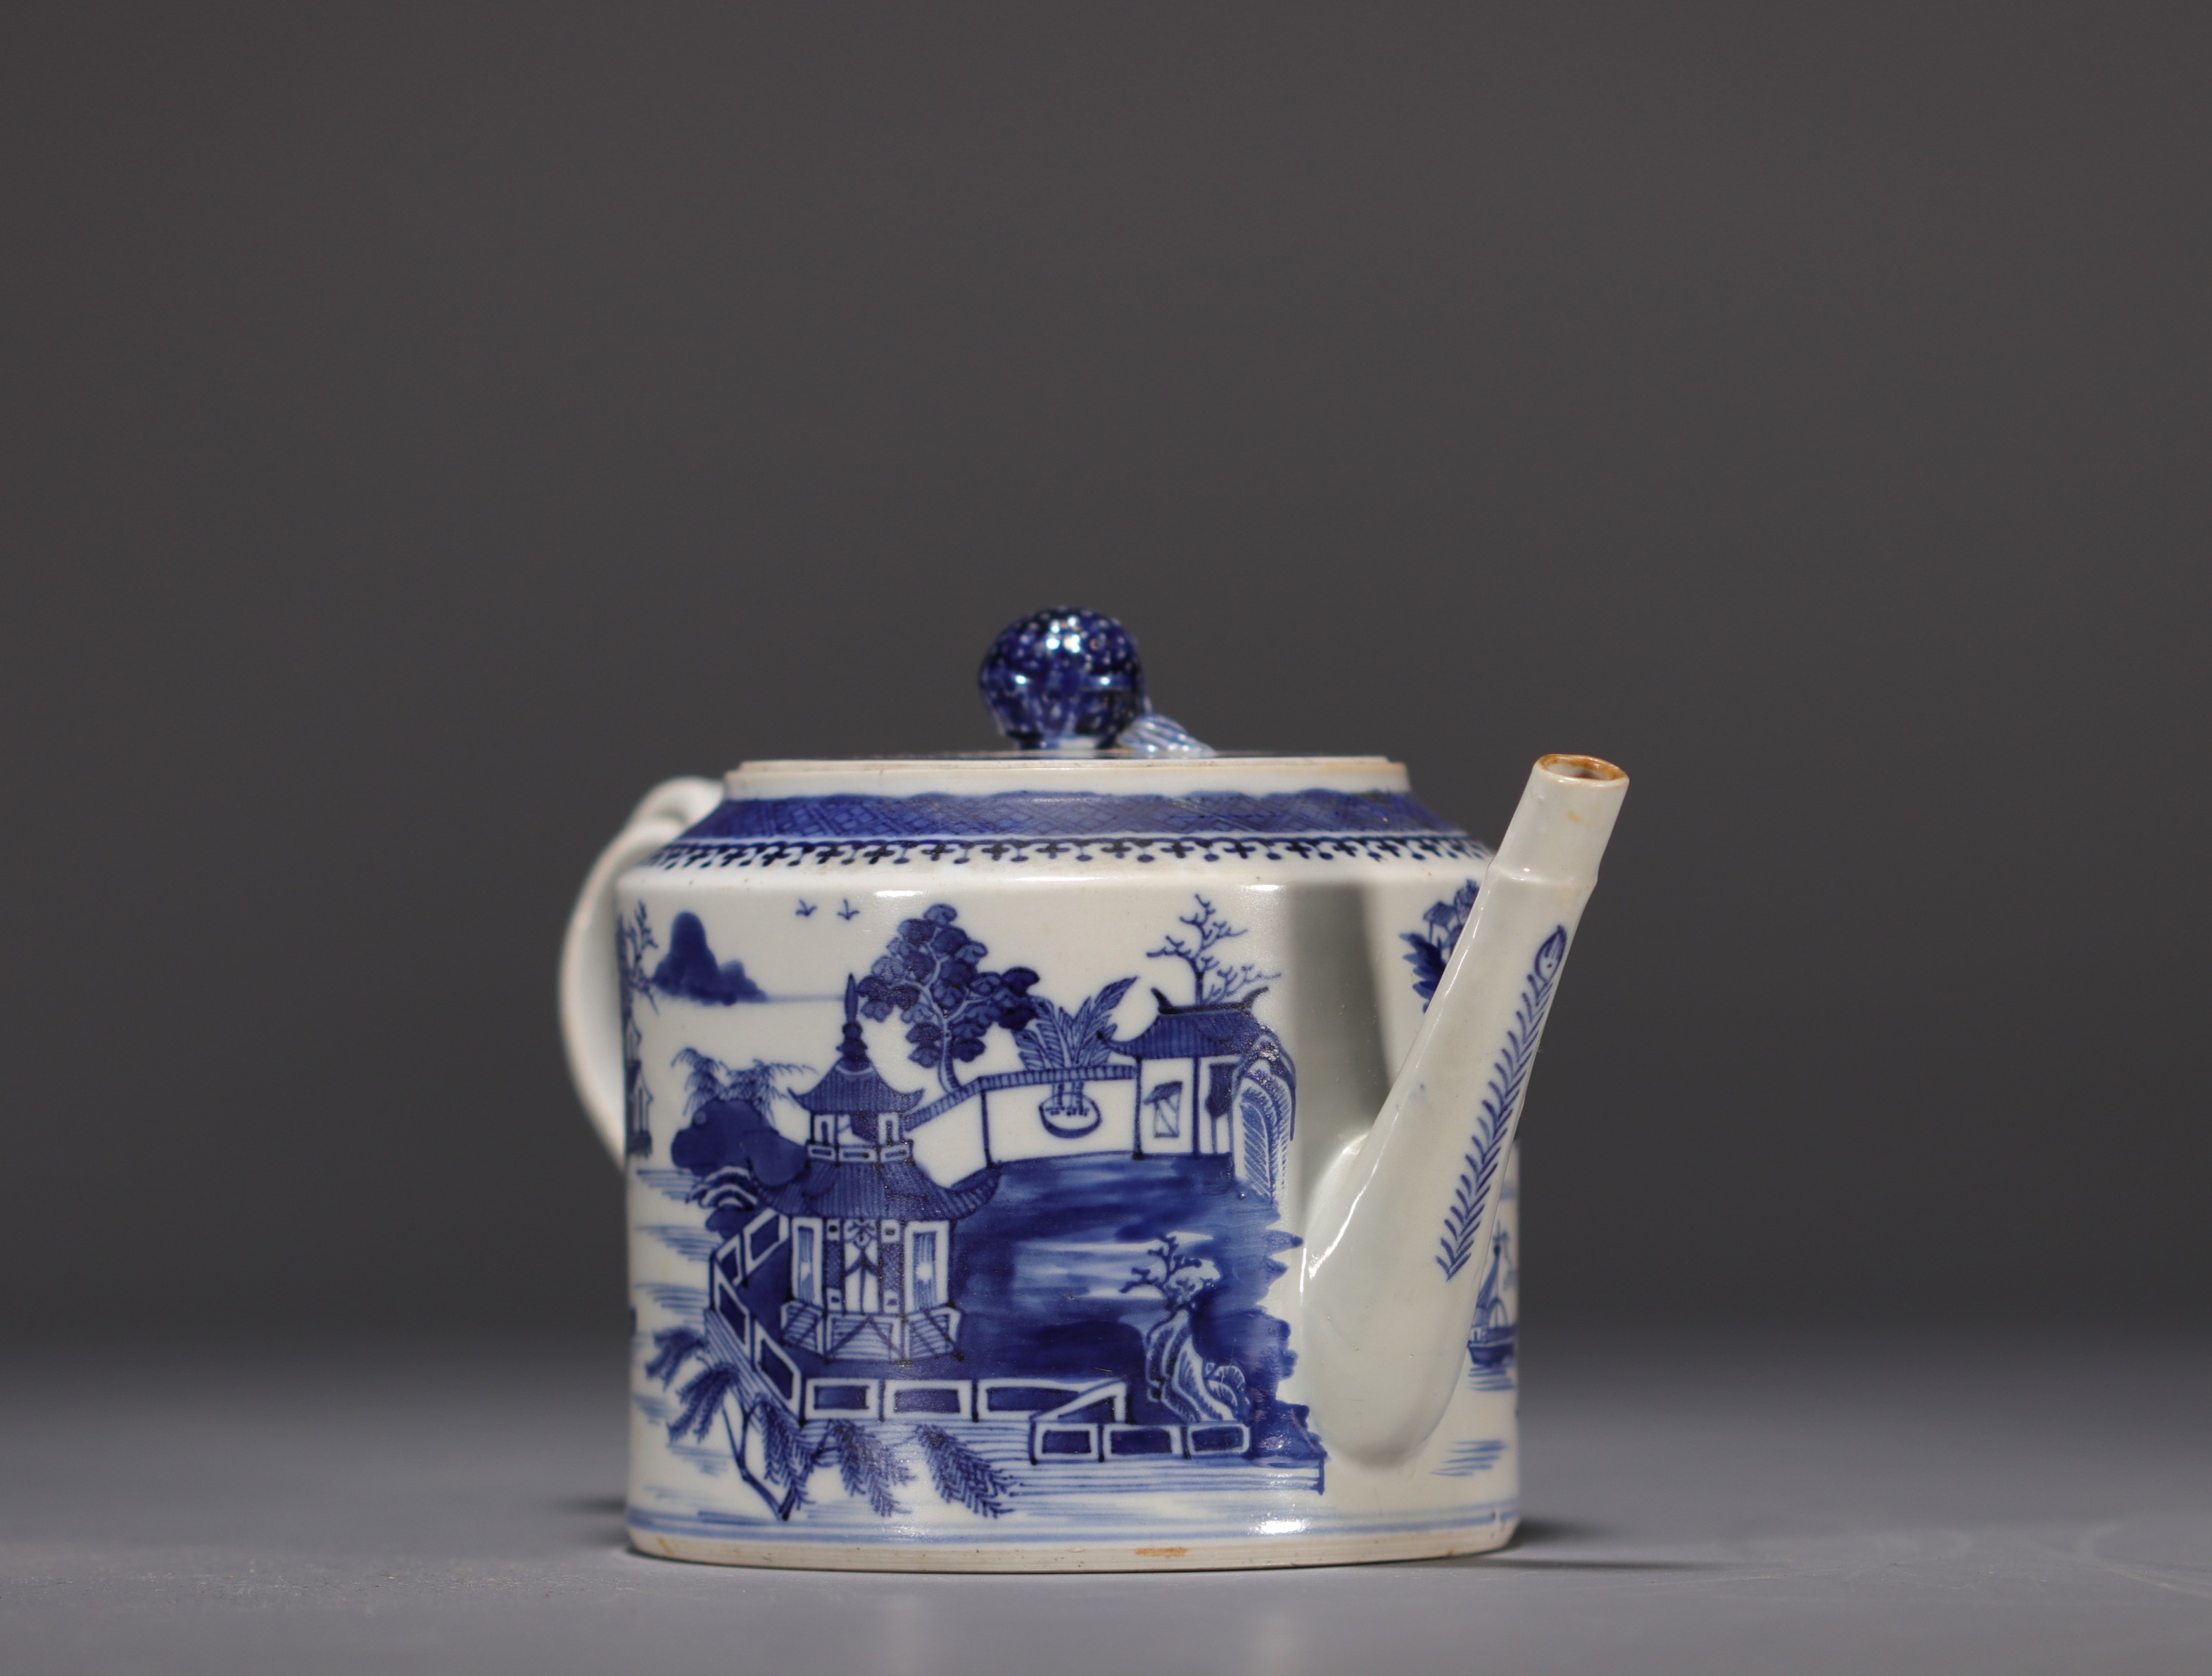 China - A white and blue porcelain teapot decorated with landscapes and a junk, 18th century. - Image 5 of 8